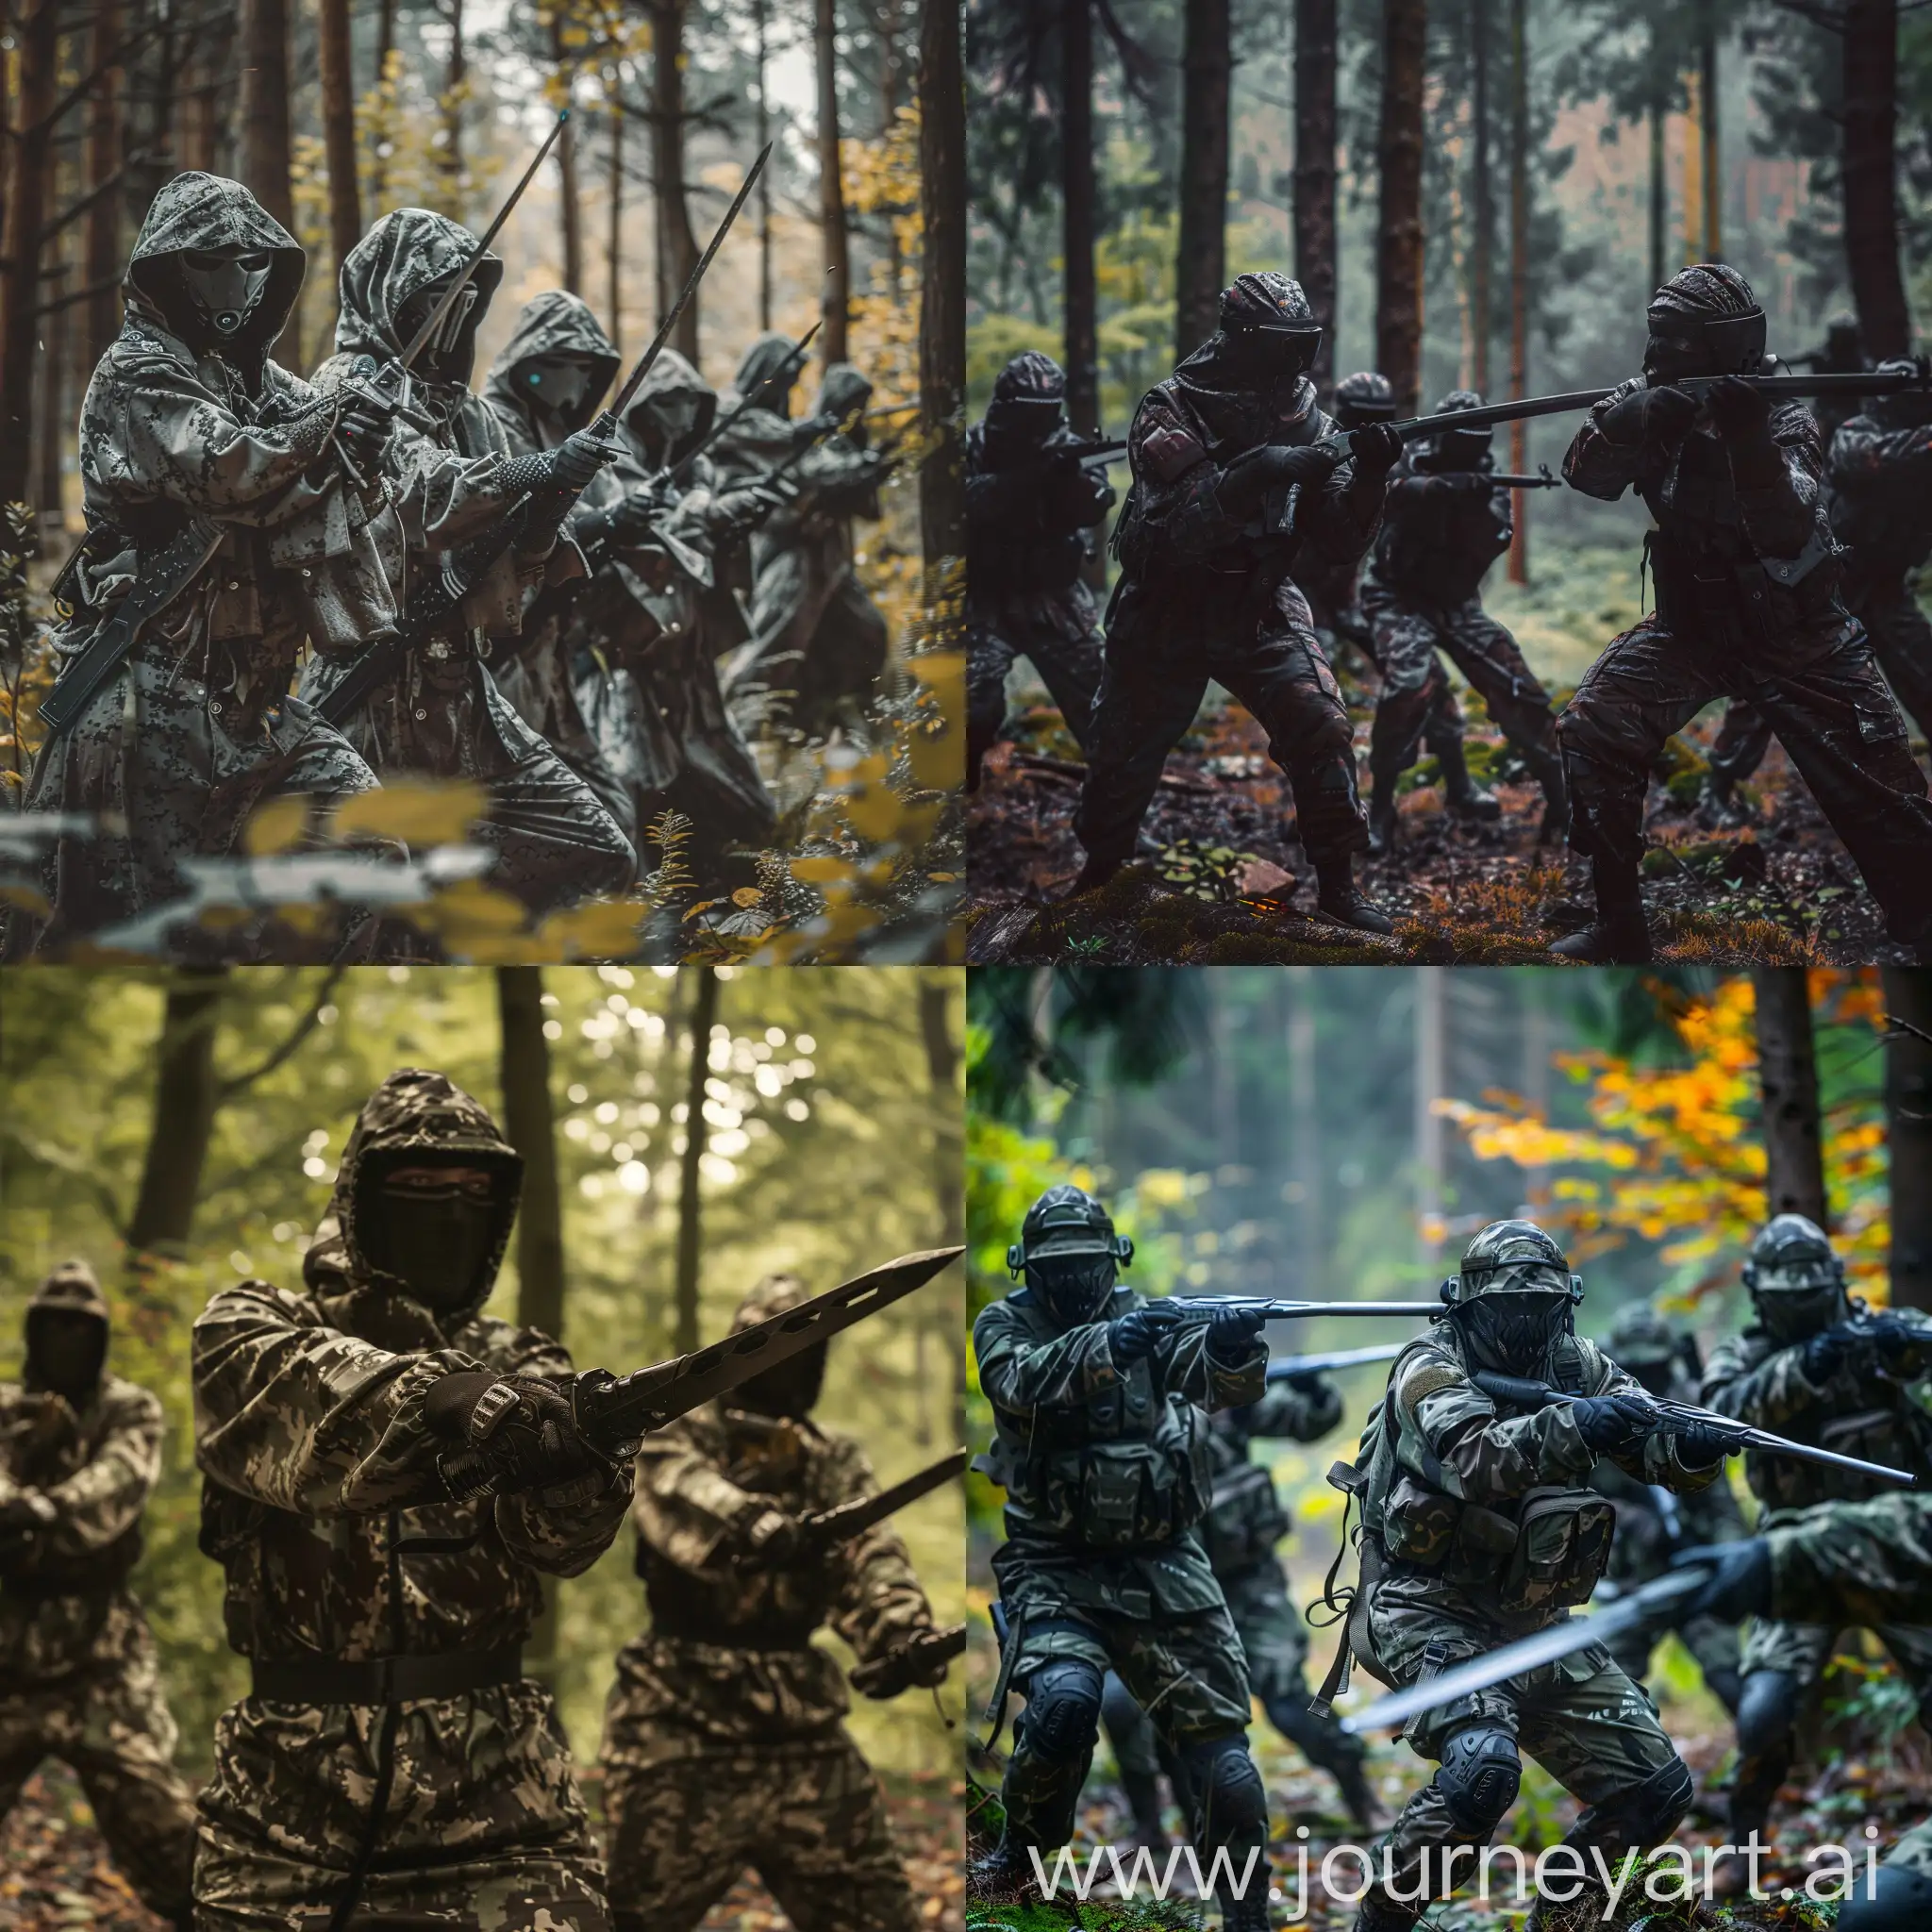 Group of slightly futuristic soldiers but instead of rifles they armed with futuristic katanas and are eager to fight. They are stationed in a forest with camouflage clothing